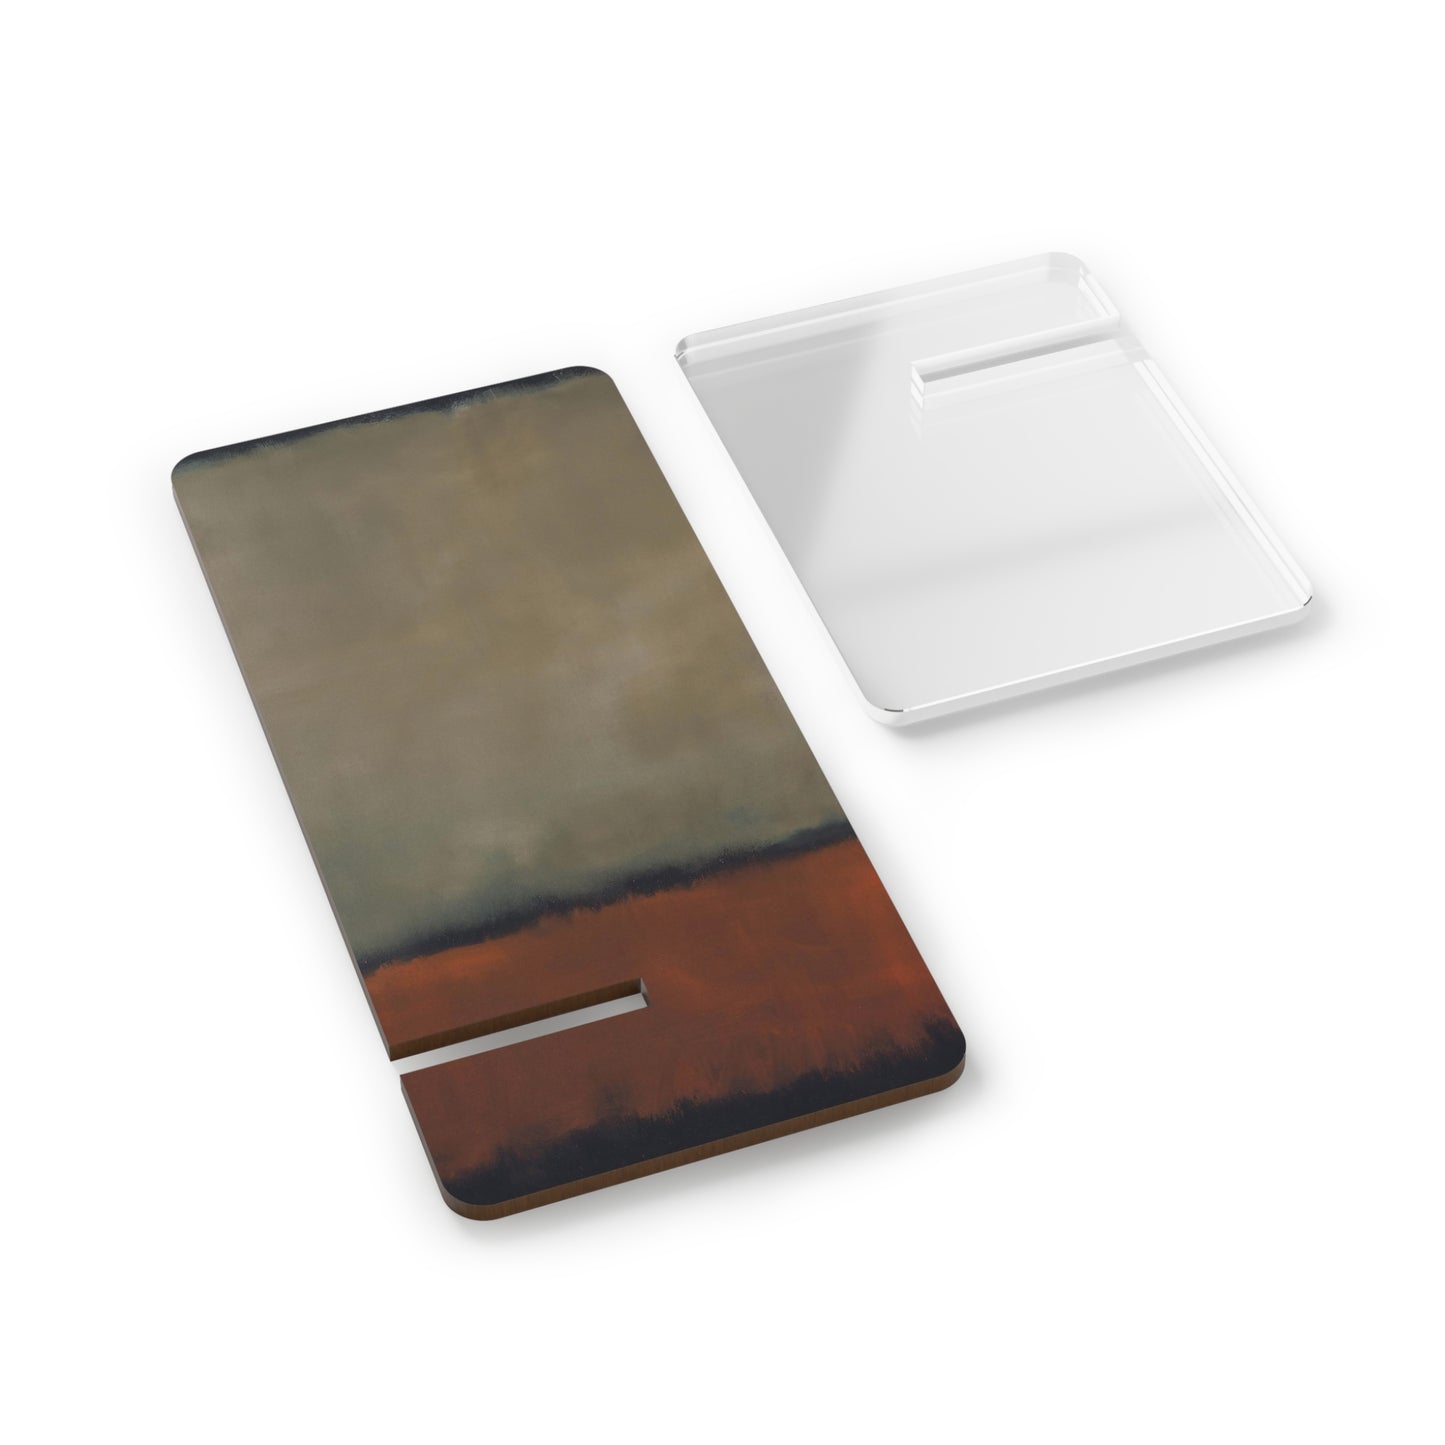 MARK ROTHKO - ABSTRACT ART - MOBILE STAND FOR SMARTPHONES